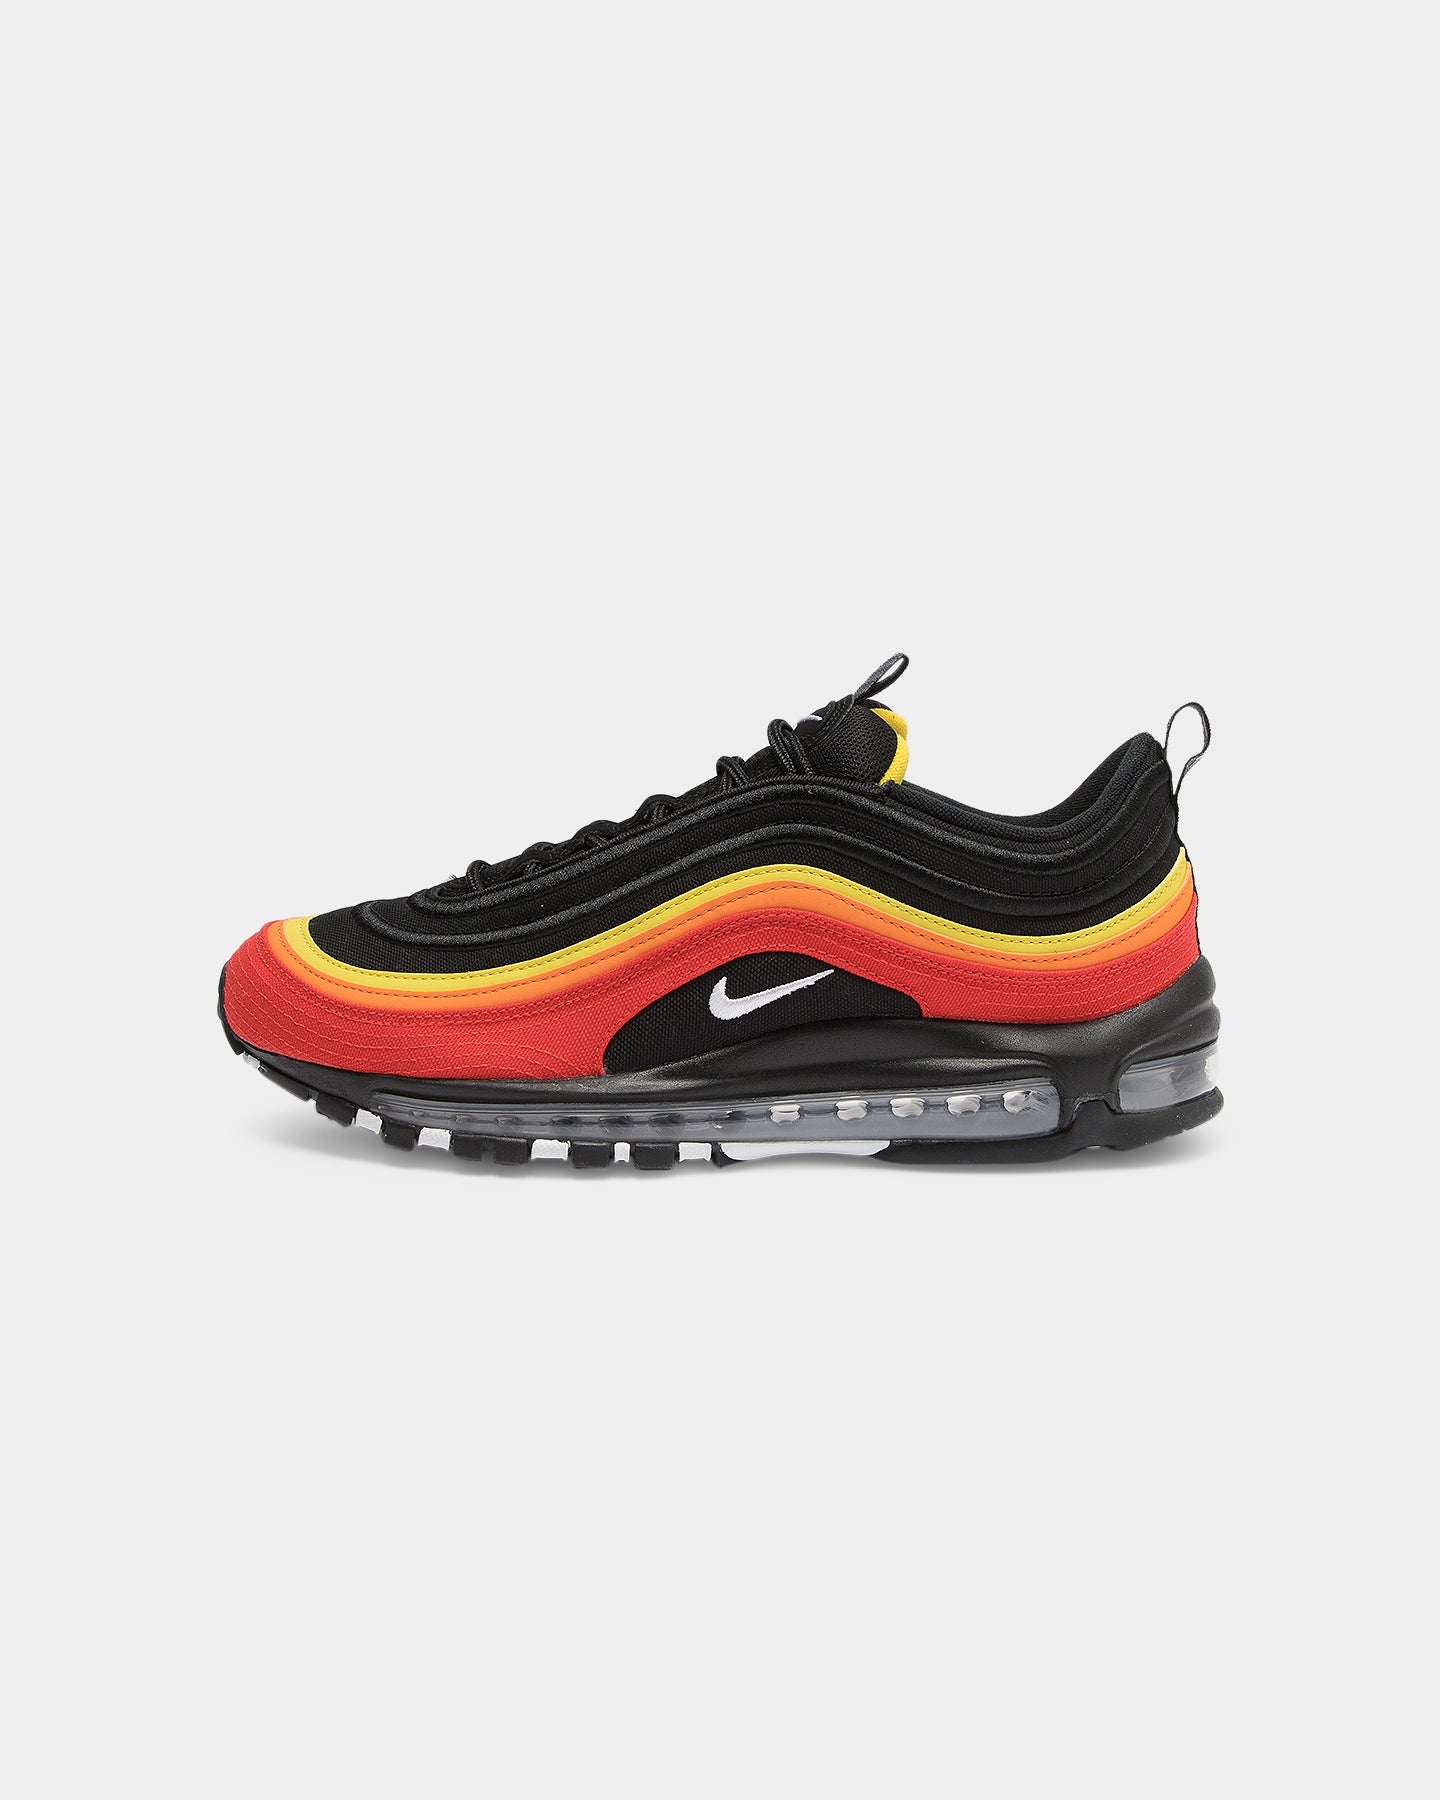 Air Max 97 Black/White/Red | Culture Kings